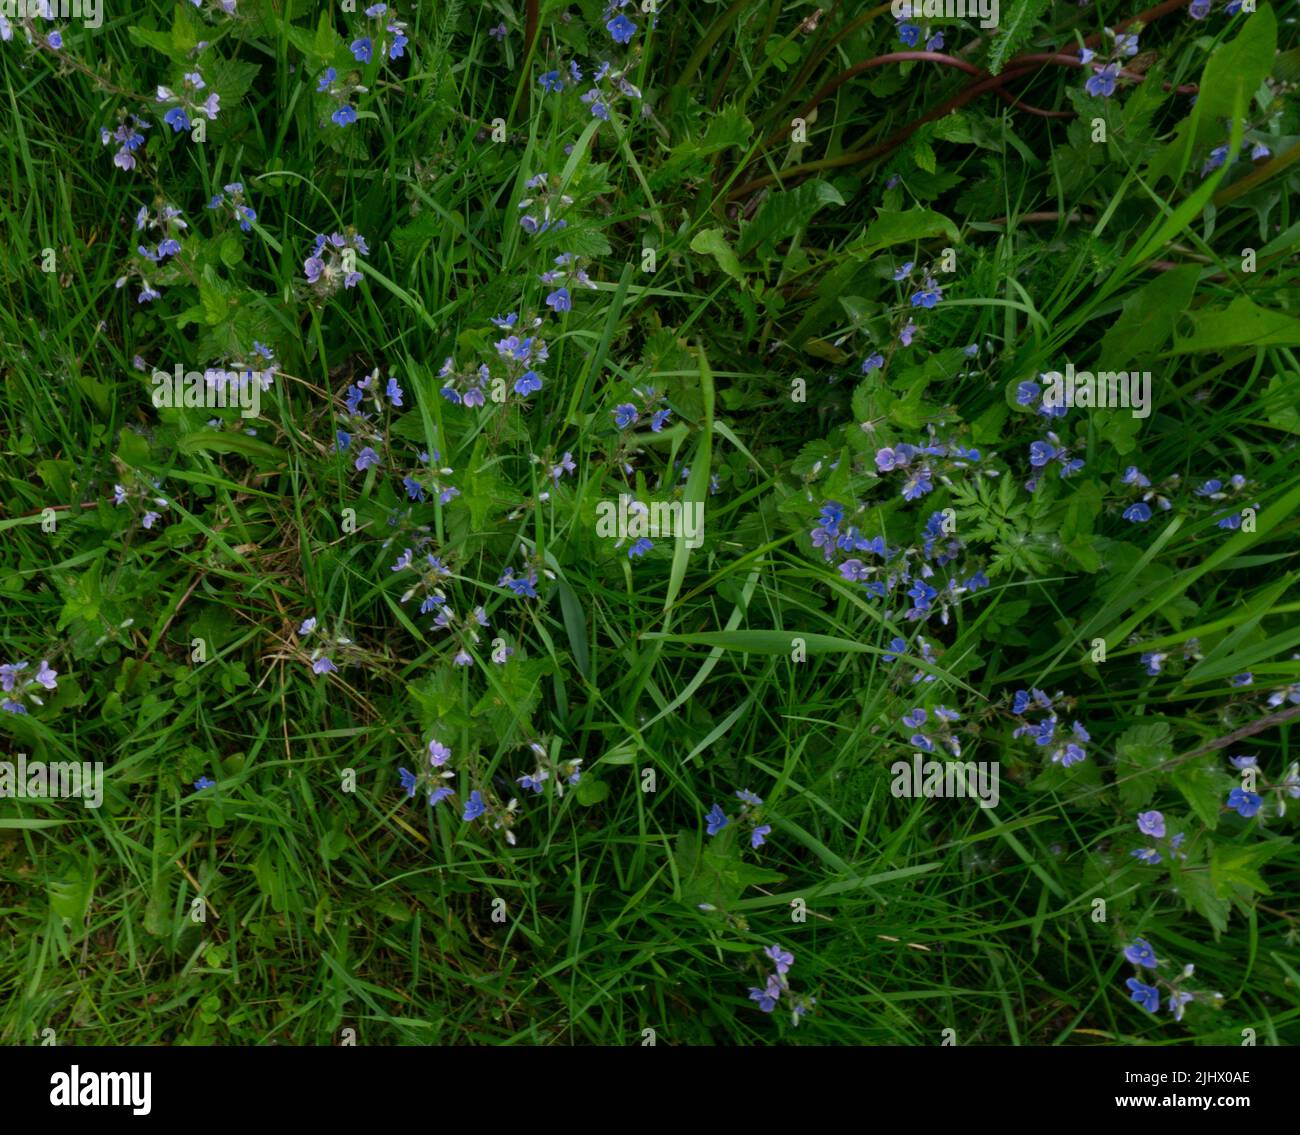 Green grass with Germander speedwell flowers. close photo. Background with yellow and green plants. Stock Photo